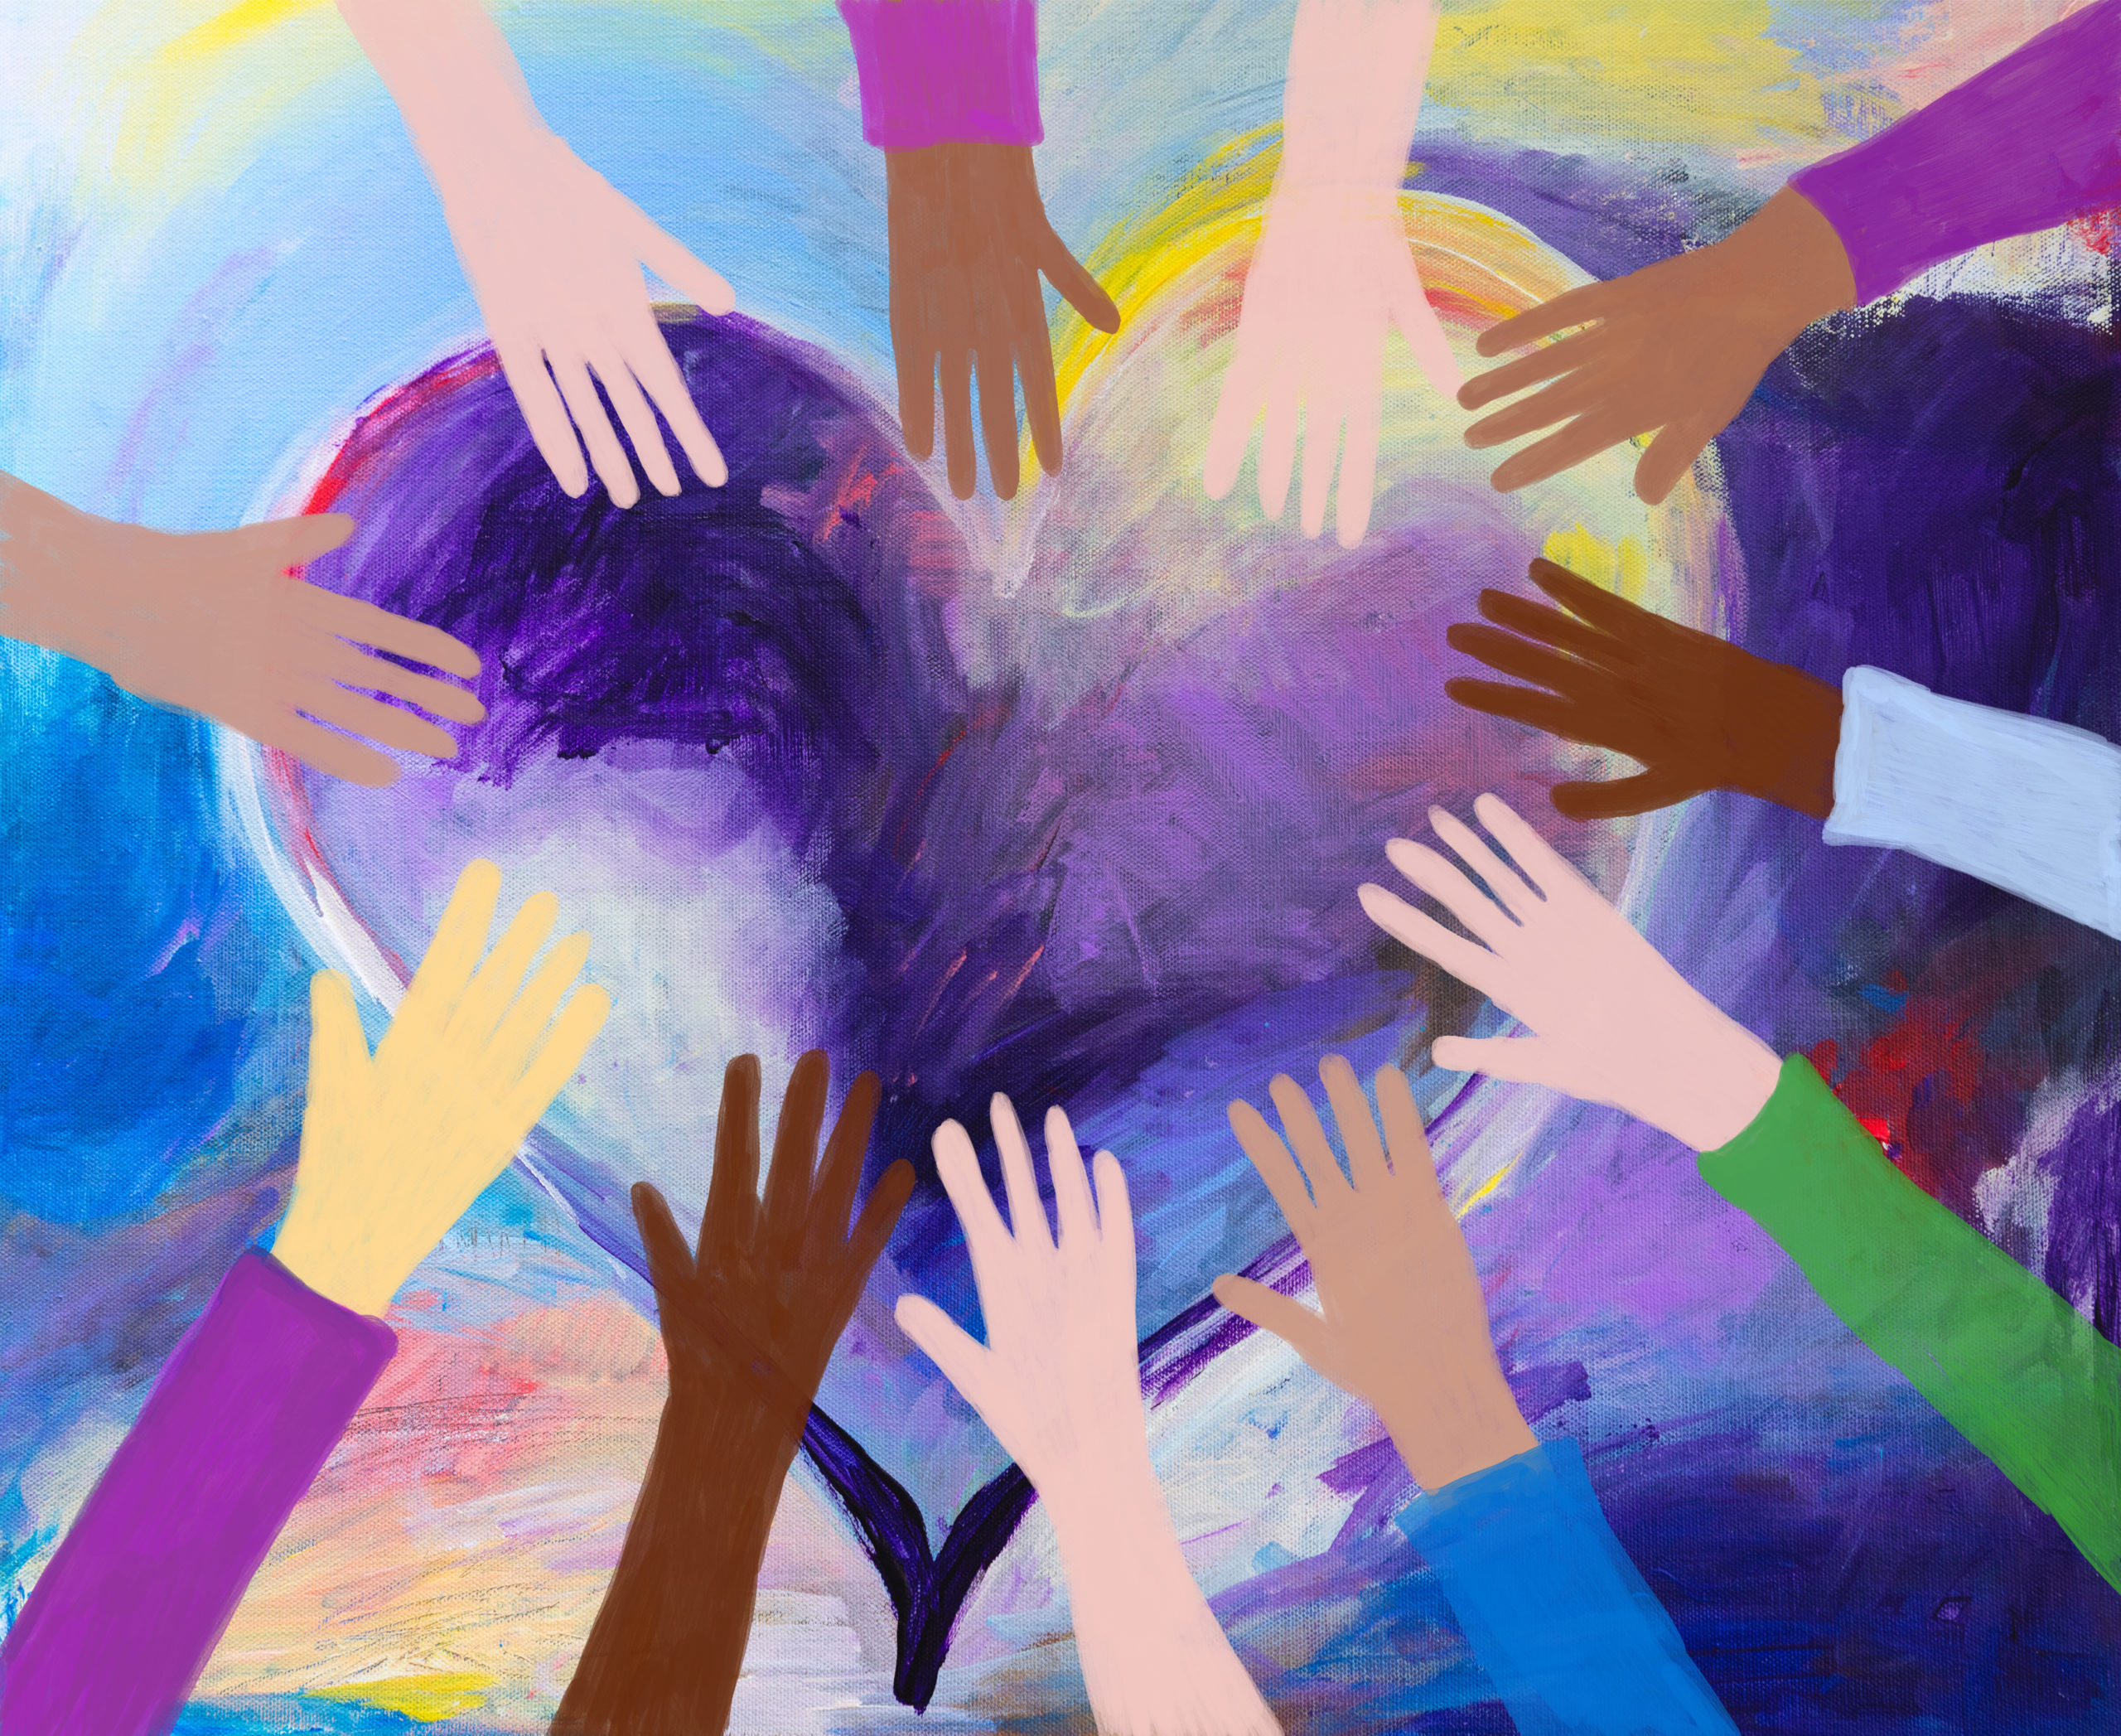 Artwork featuring a painting of several hands reaching out to touch a heart - symbolizing personalized philanthropy.